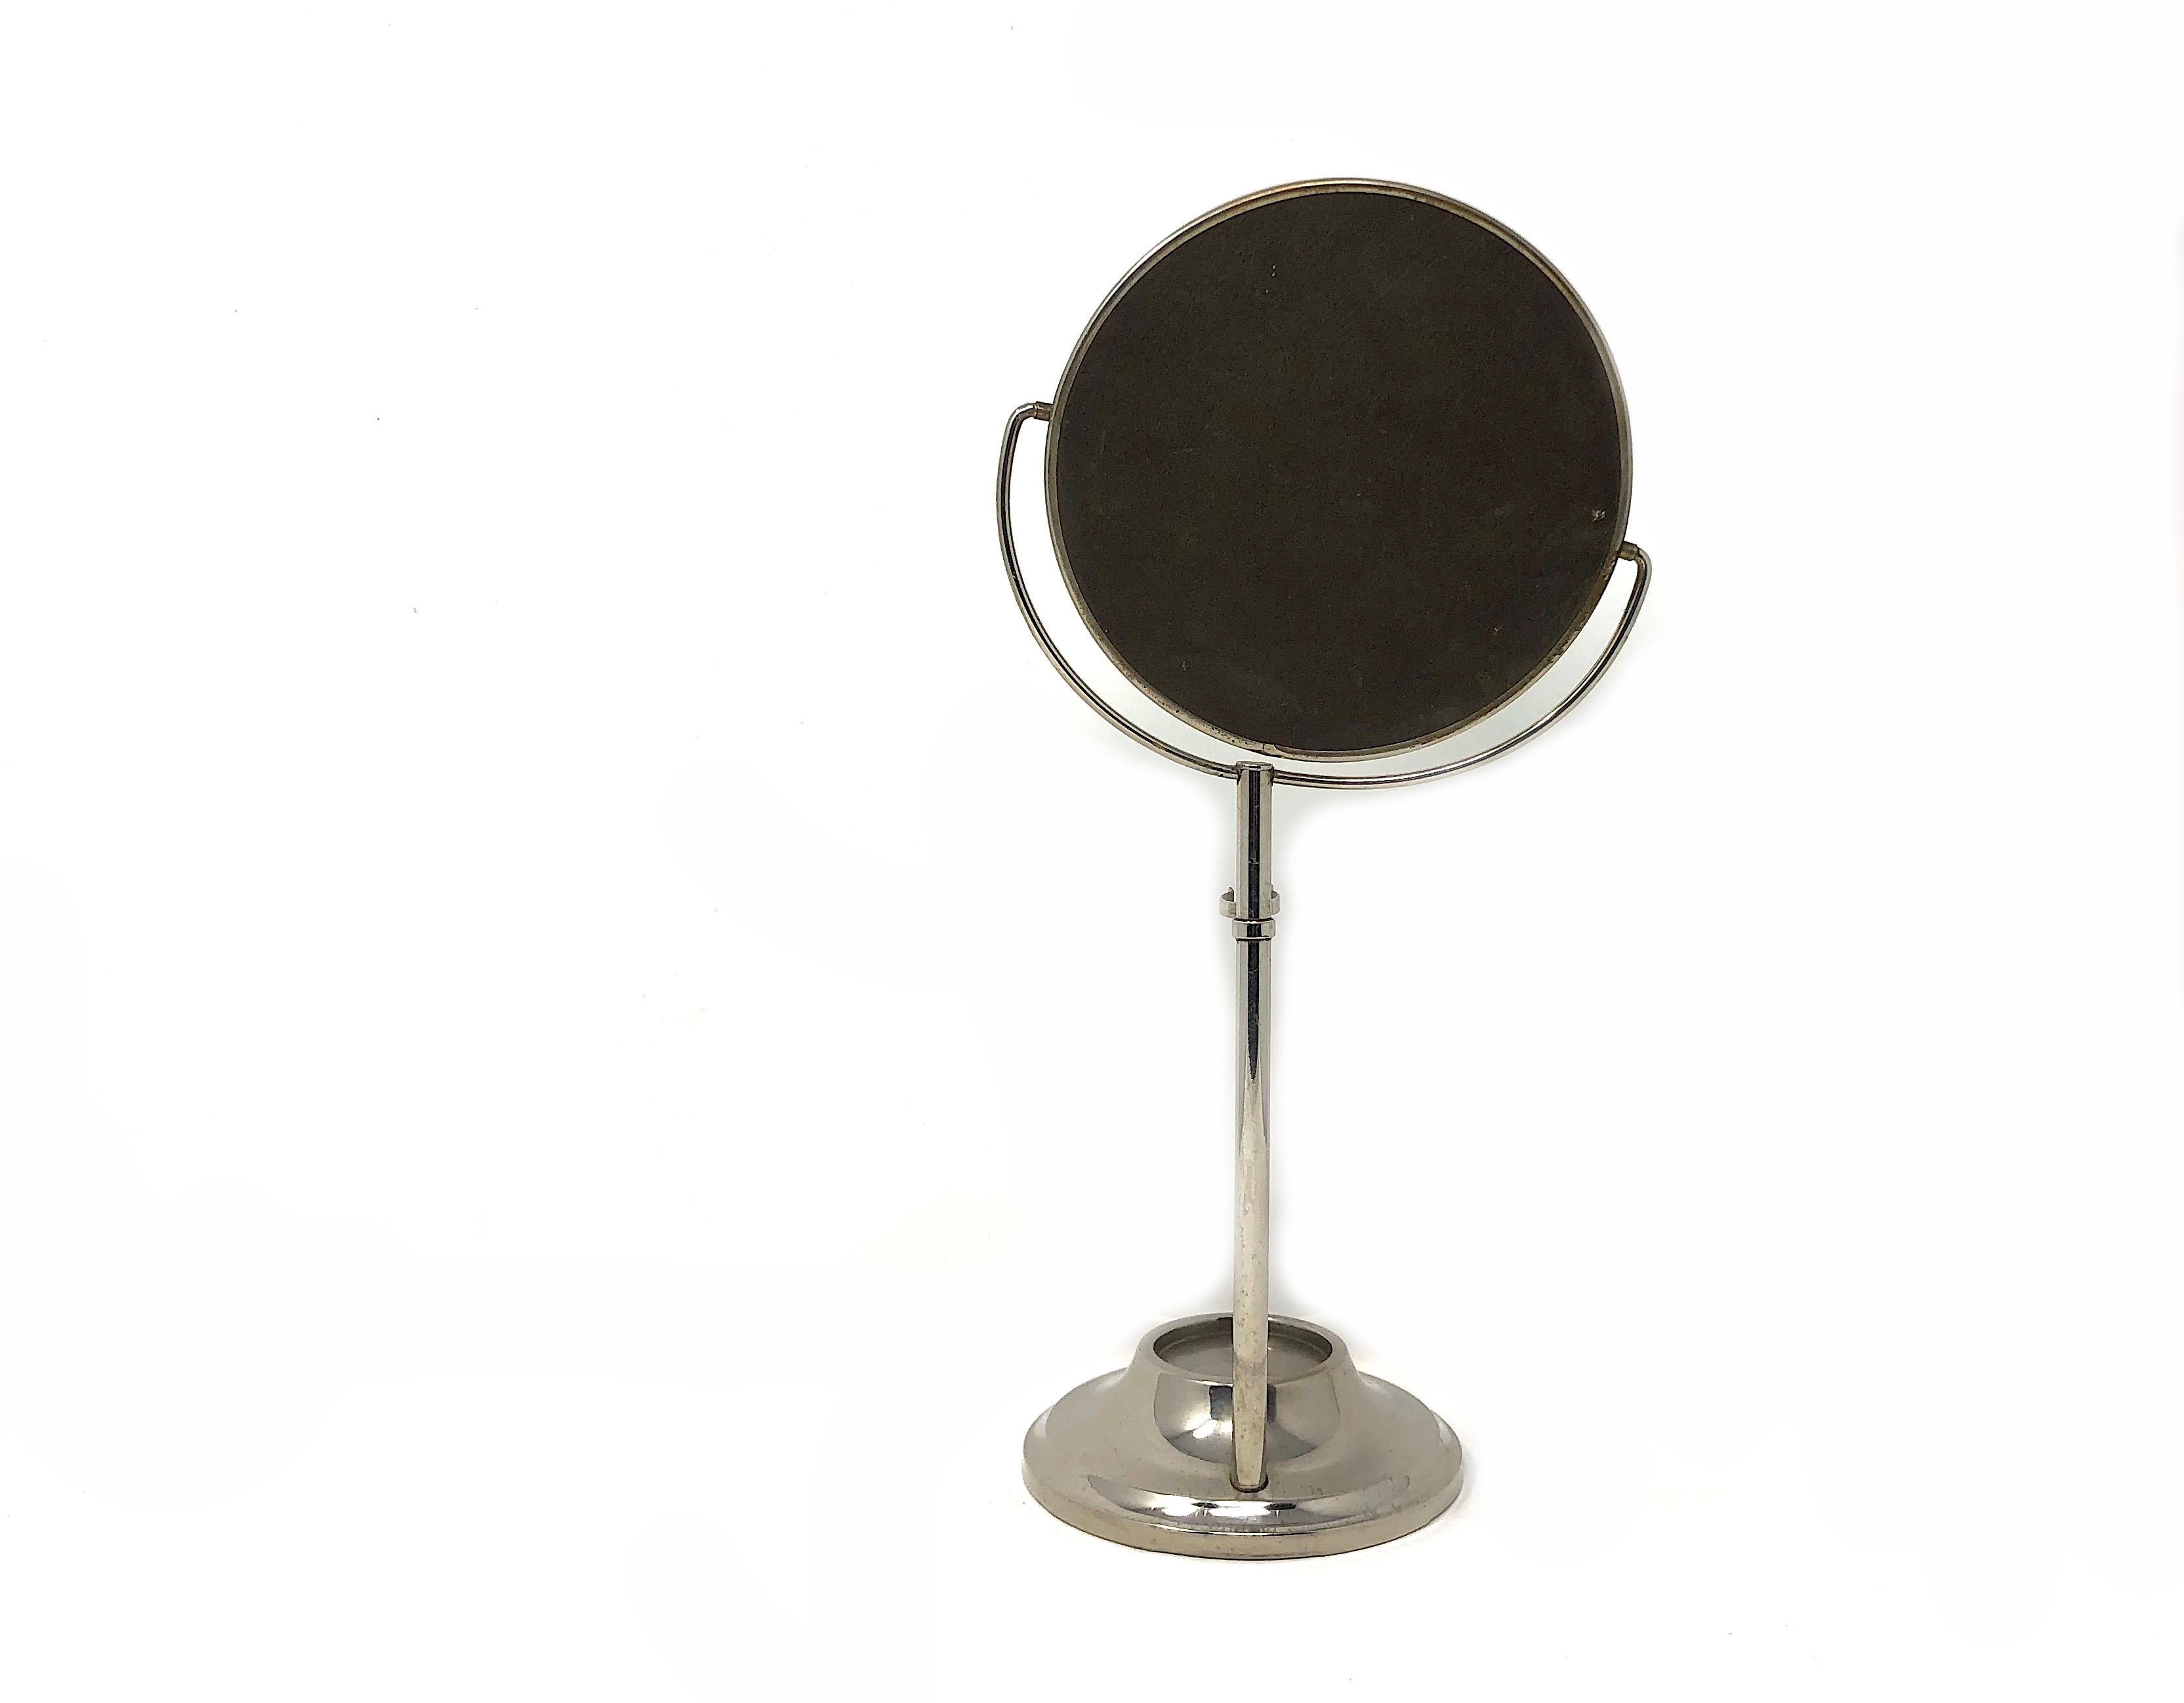 American Antique Art Deco Chrome Silver Pedestal Shaving Mirror on Stand with Holder For Sale